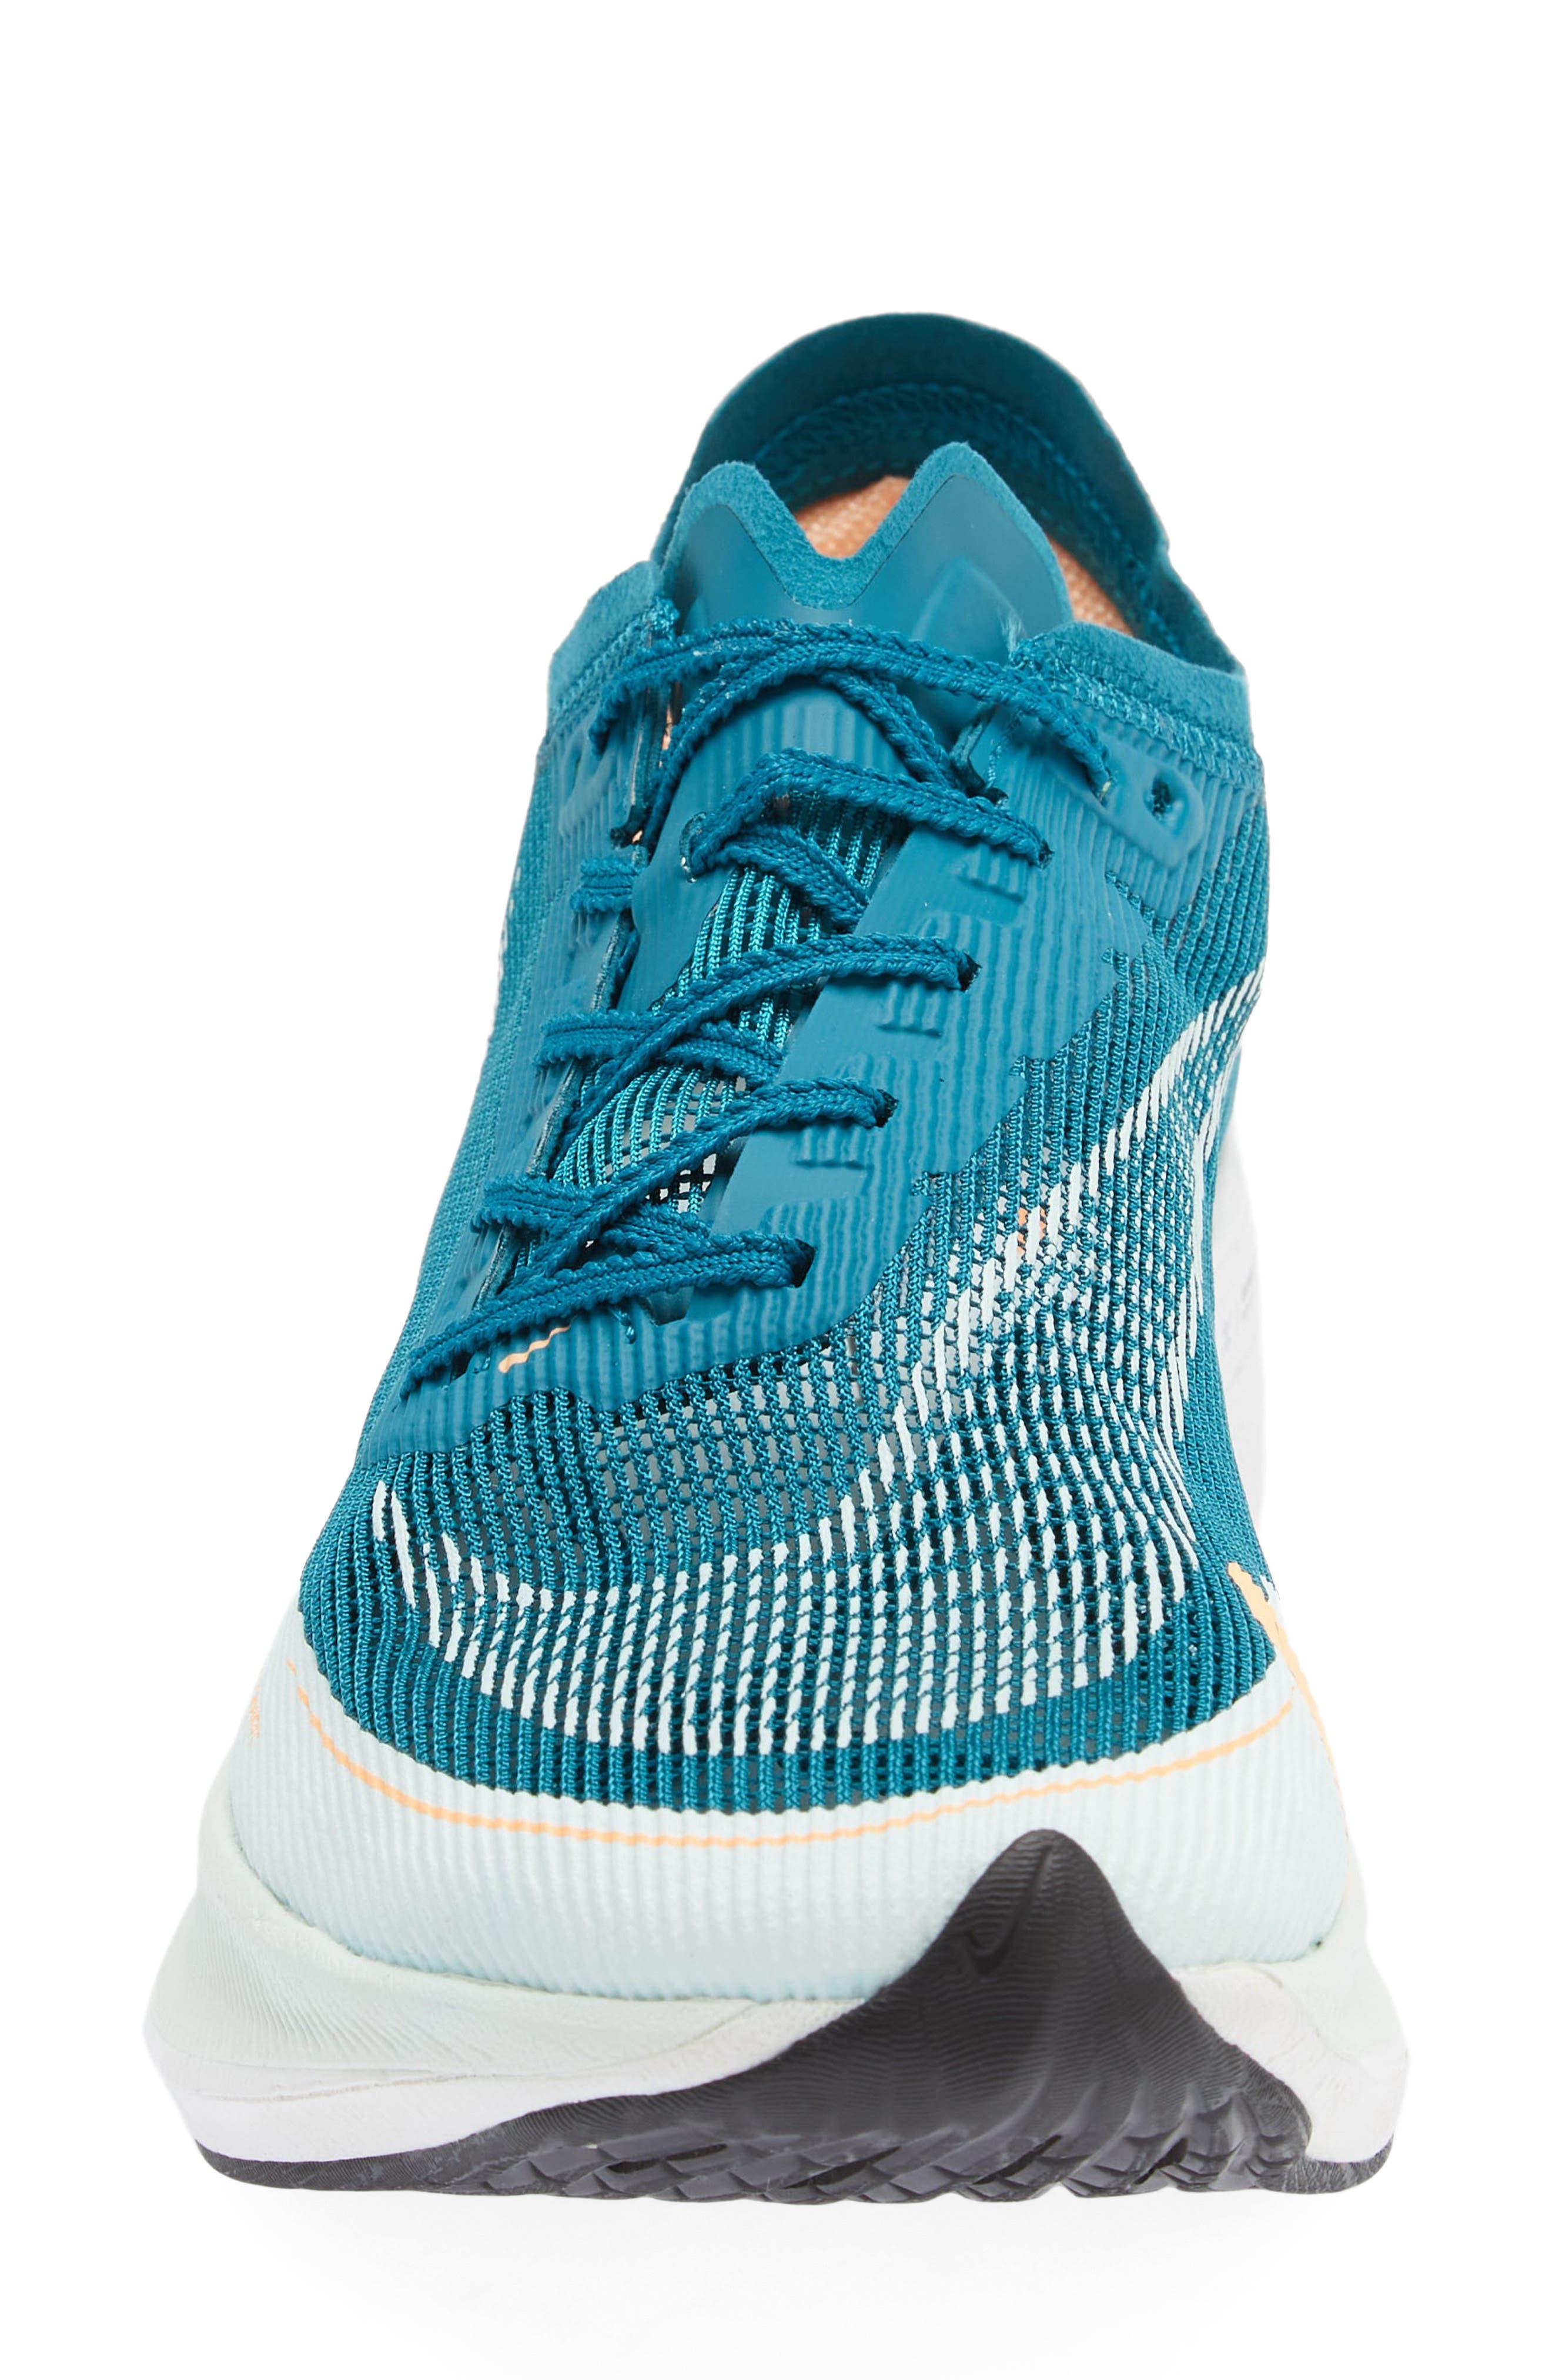 Nike Zoomx Vaporfly Next% 2 Racing Shoe In Bright Spruce/barely